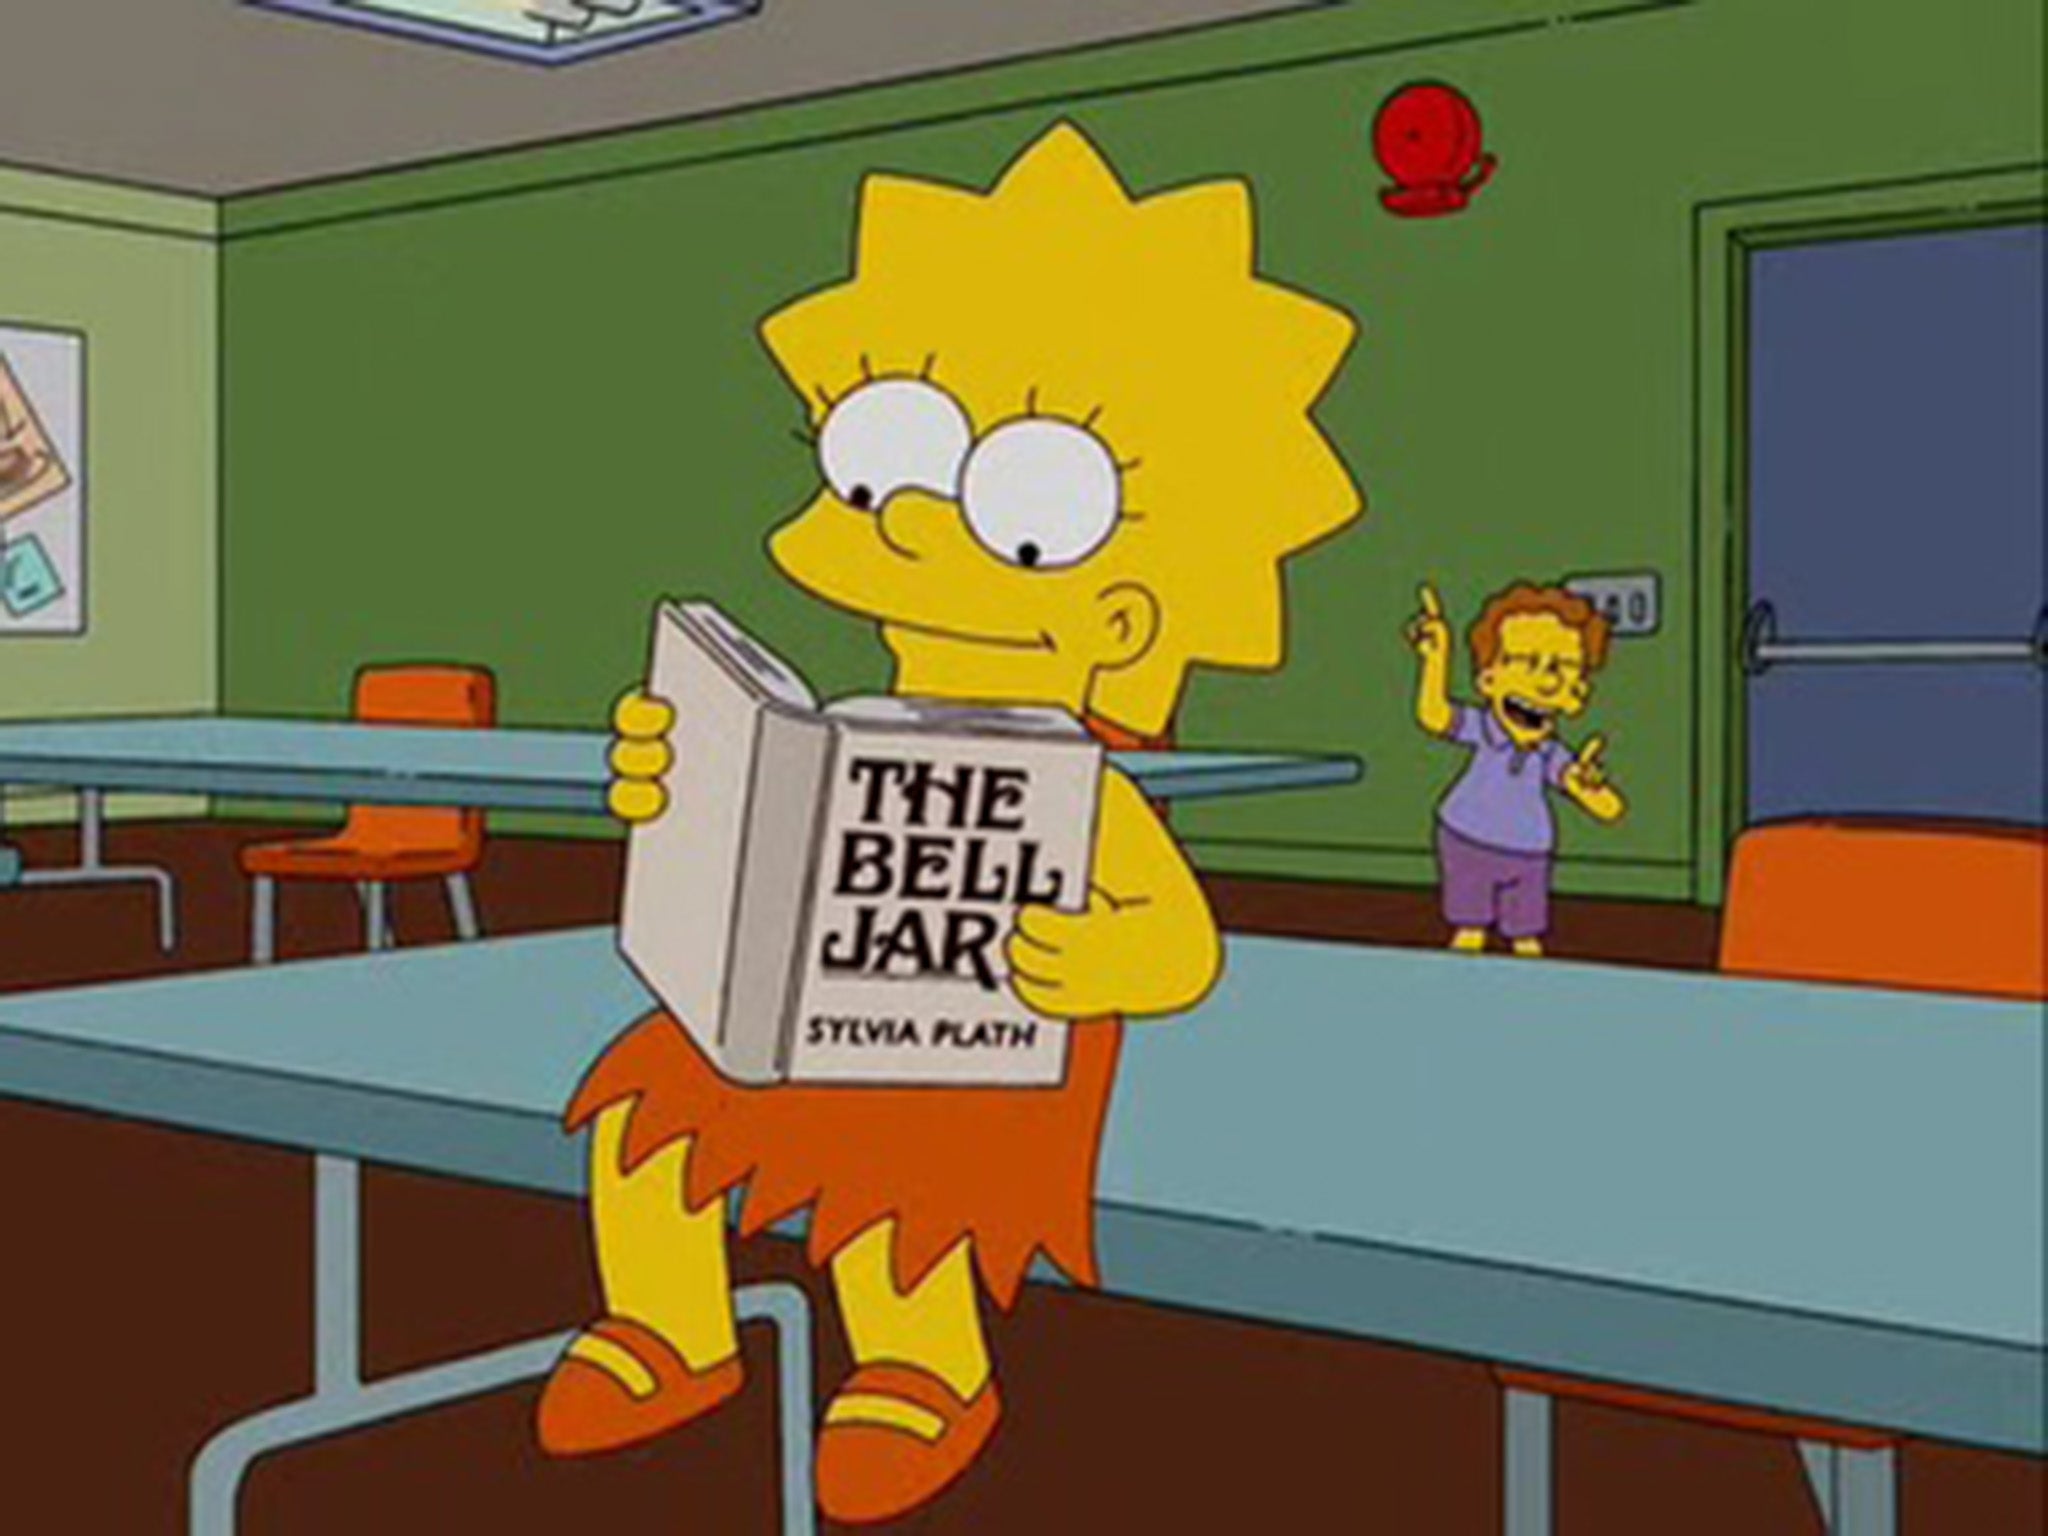 Lisa Simpson’s reading choices have prompted an online reading club to be set up in her name